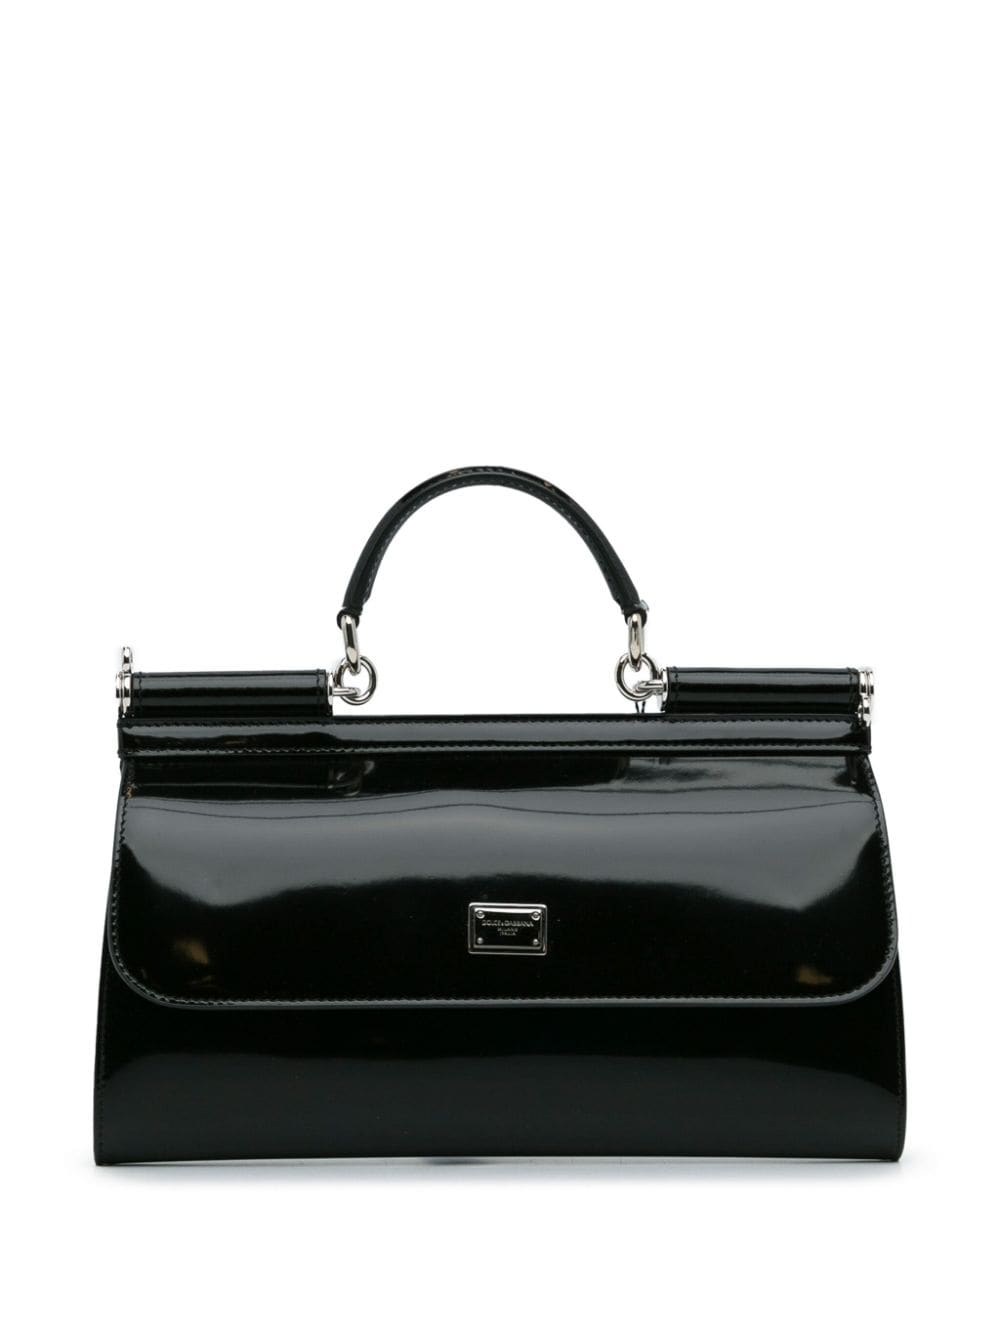 2000-2022 Miss Sicily patent leather two-way bag